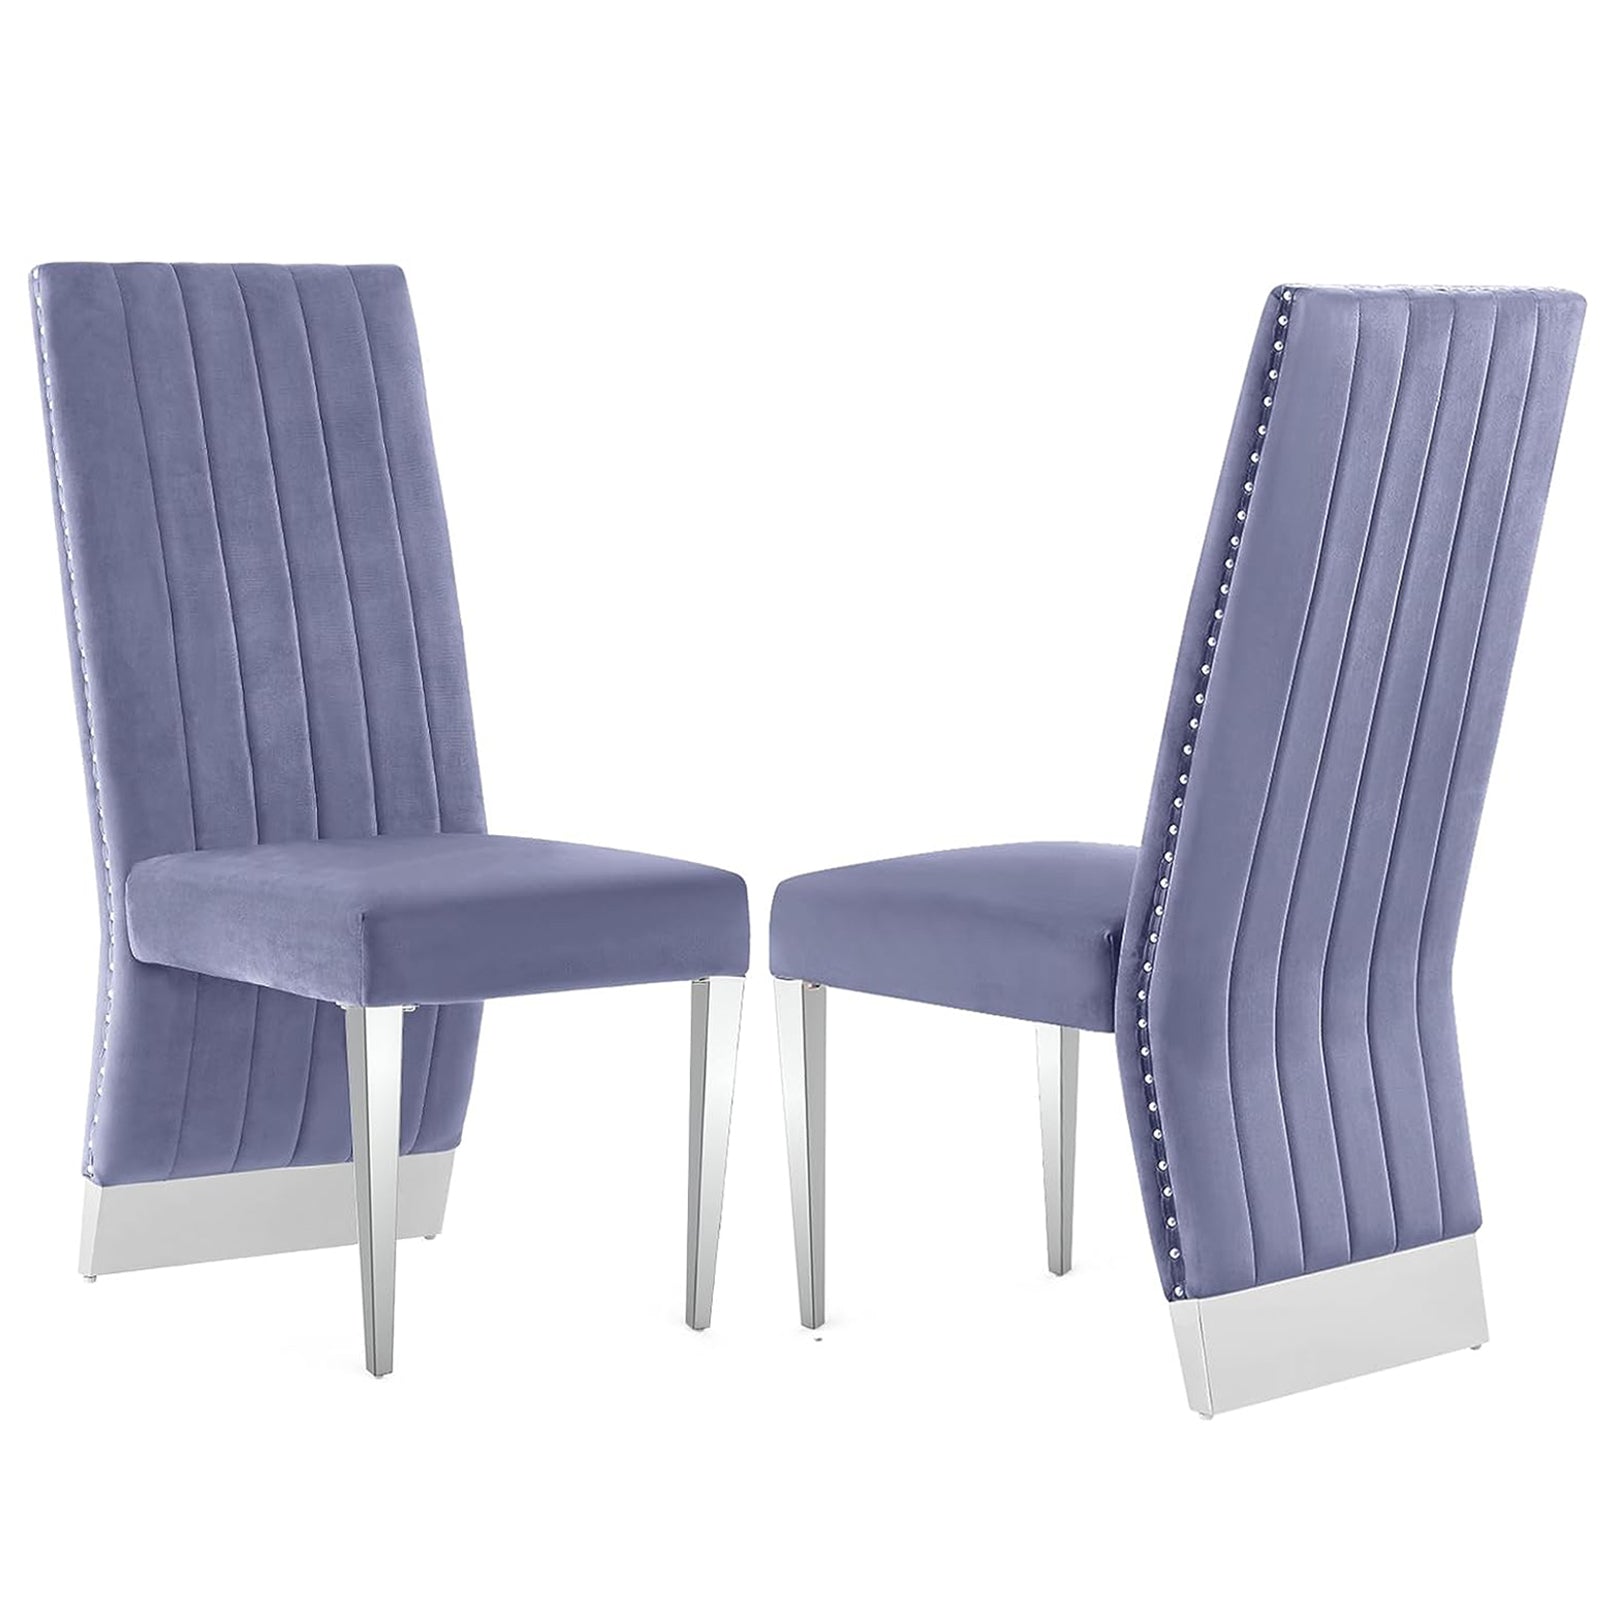 Modern and Bold: The Features of the Gray Velvet Dining Chair